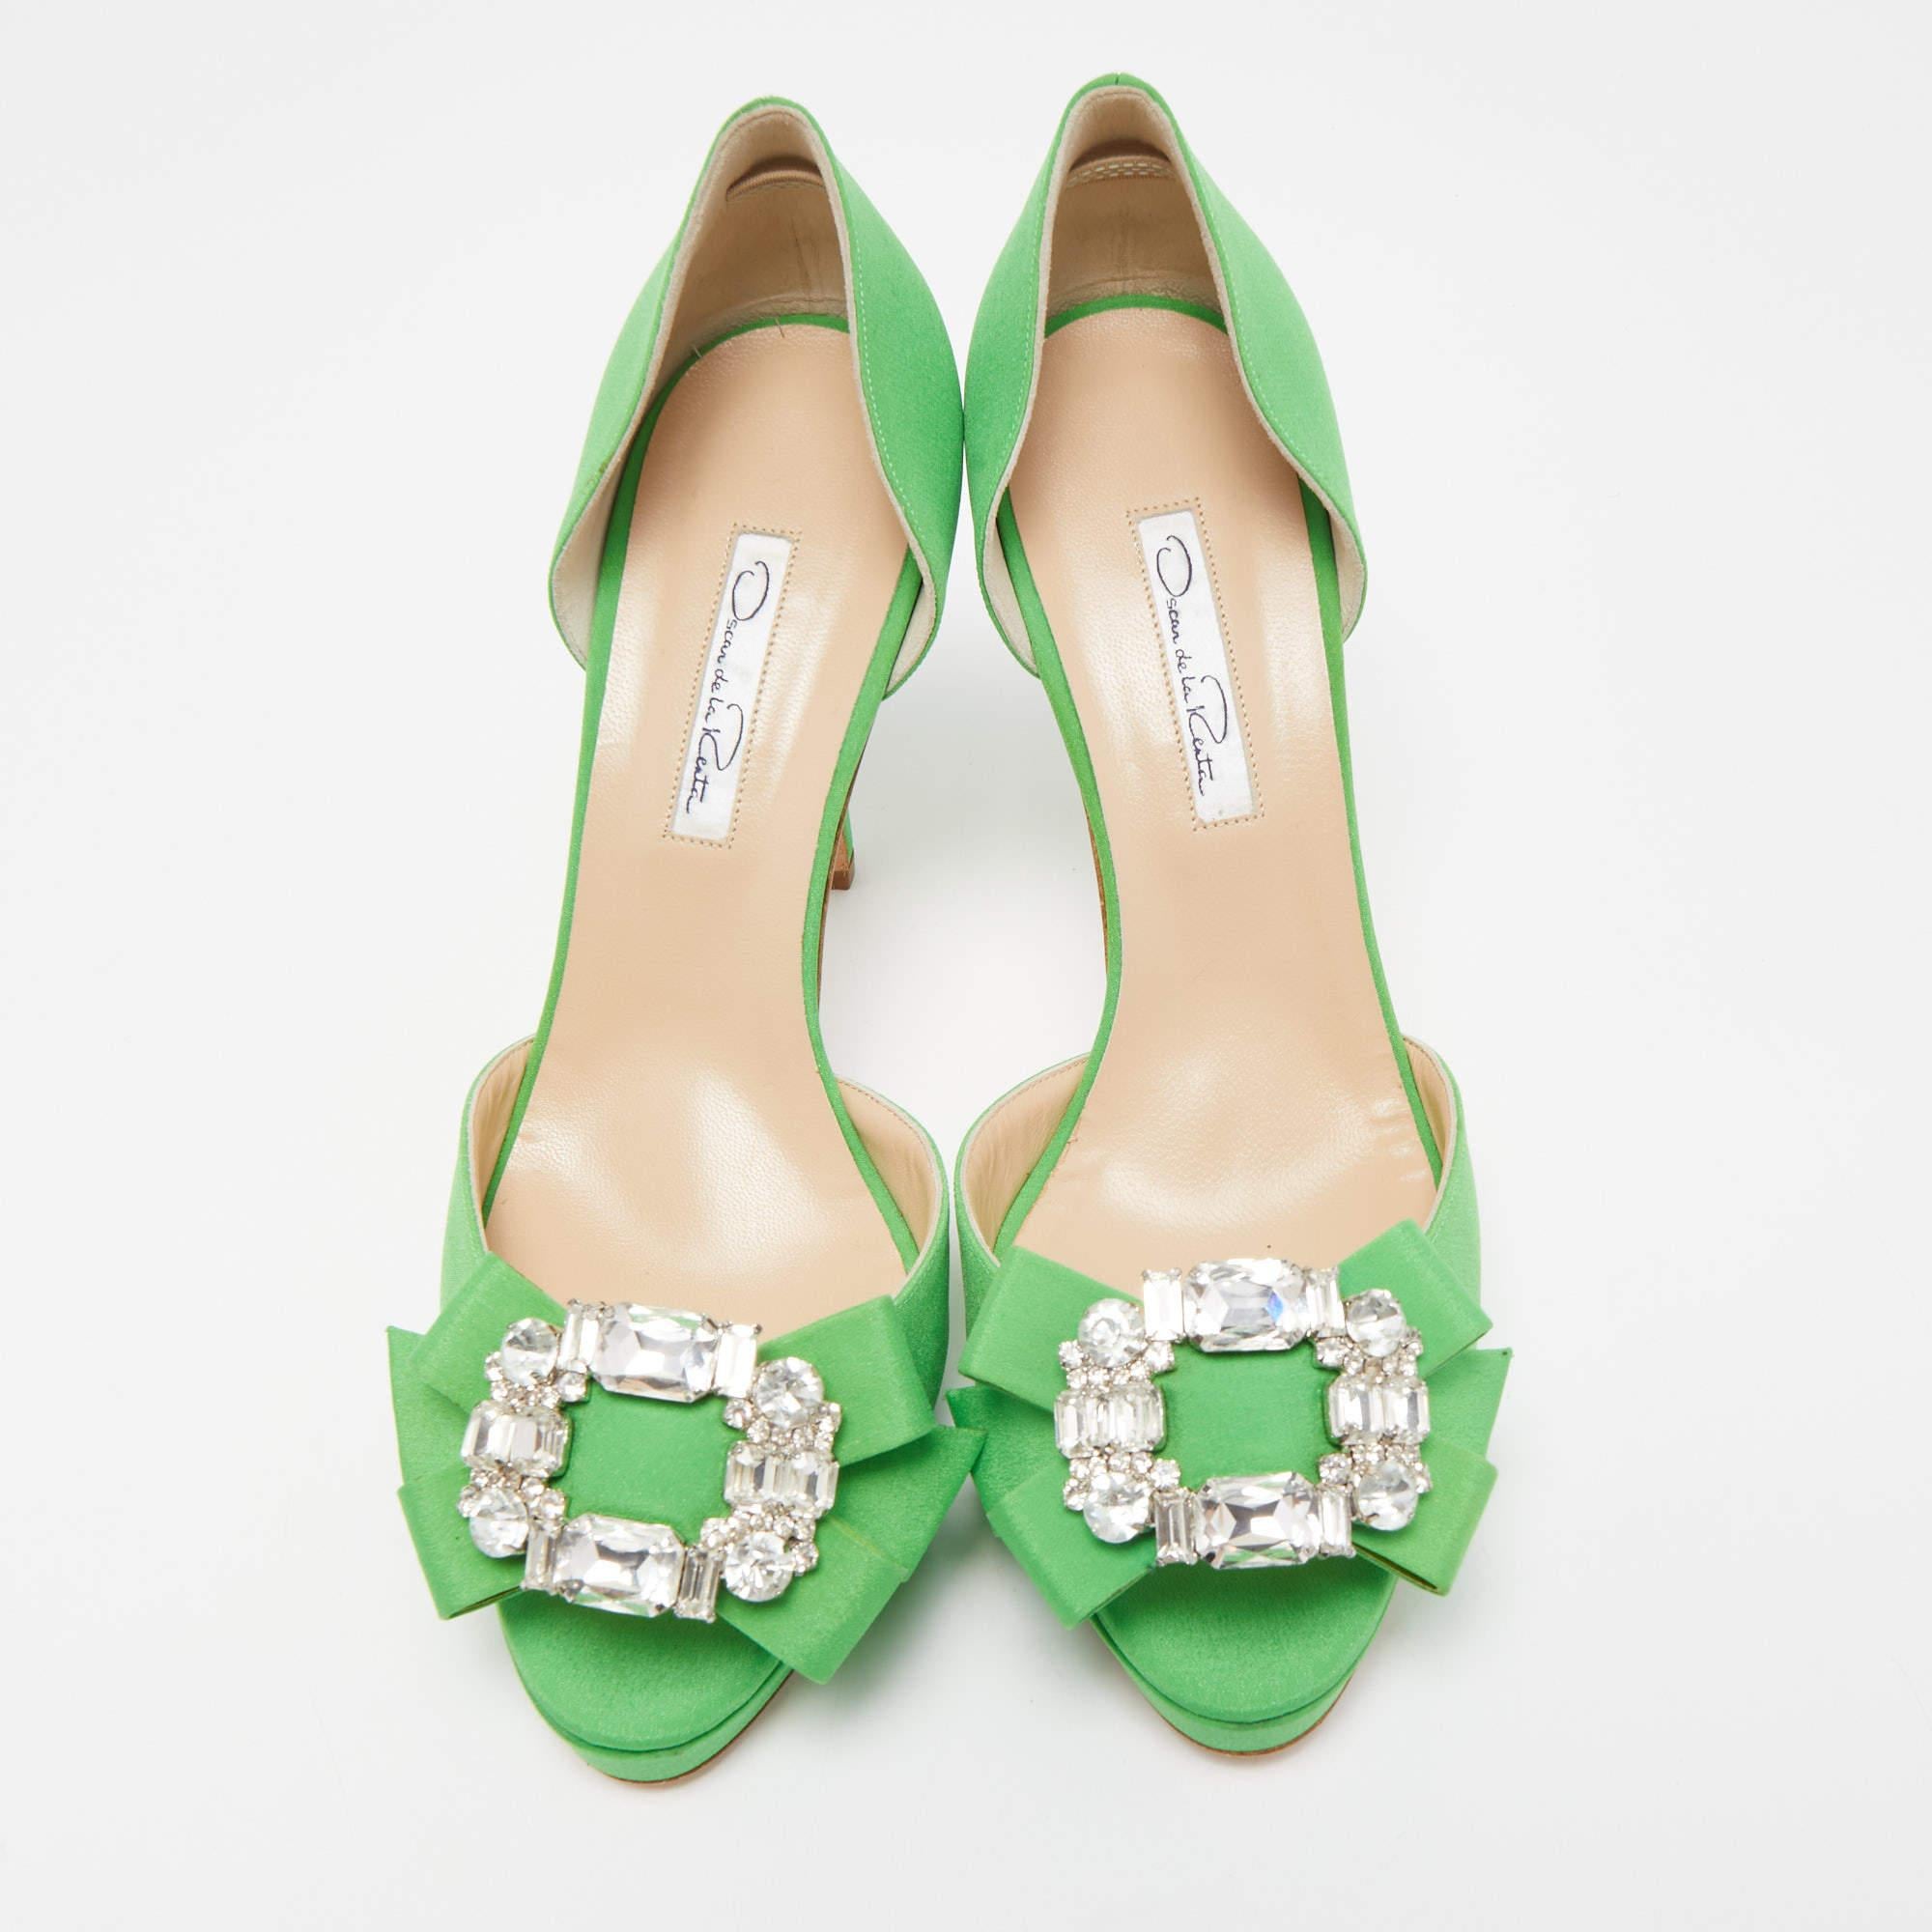 Let your feet do all the talking as you flaunt these fabulous sandals from Oscar de la Renta. These fabric shoes will make you look confident and uber-stylish. They feature open toes, embellished bow details and tall heels to keep you at the top of